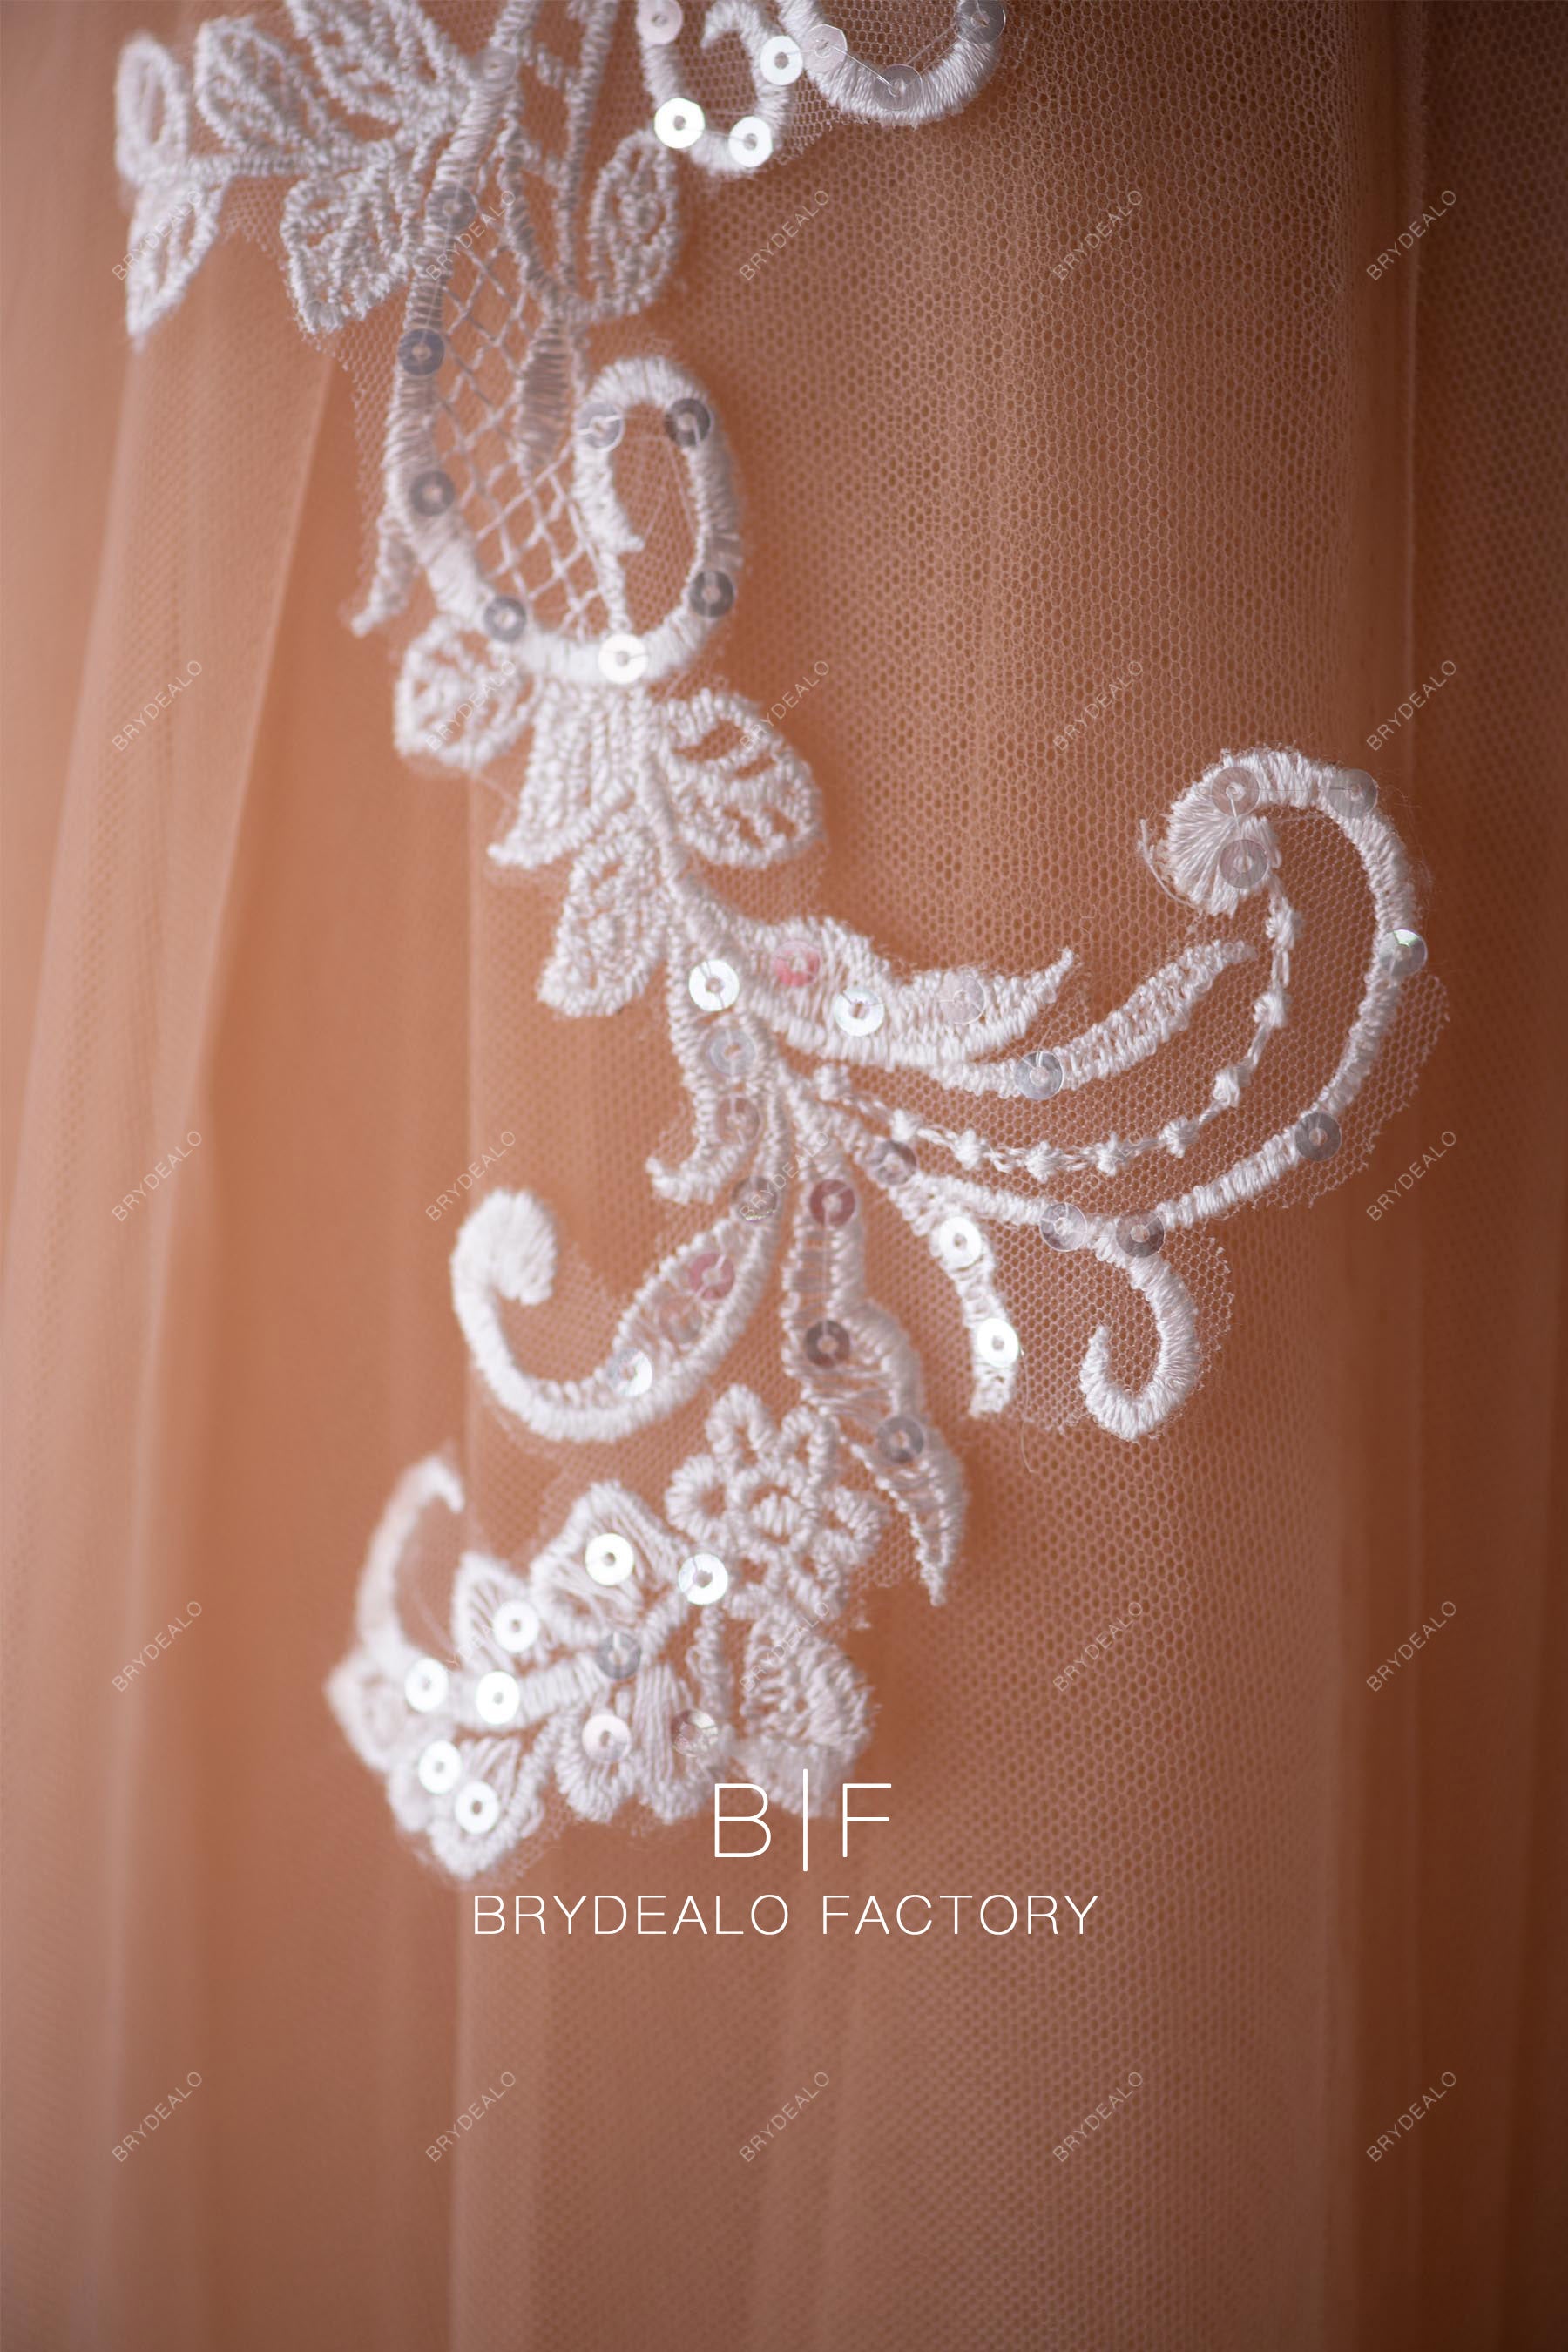 shimmery embroidery lace applique